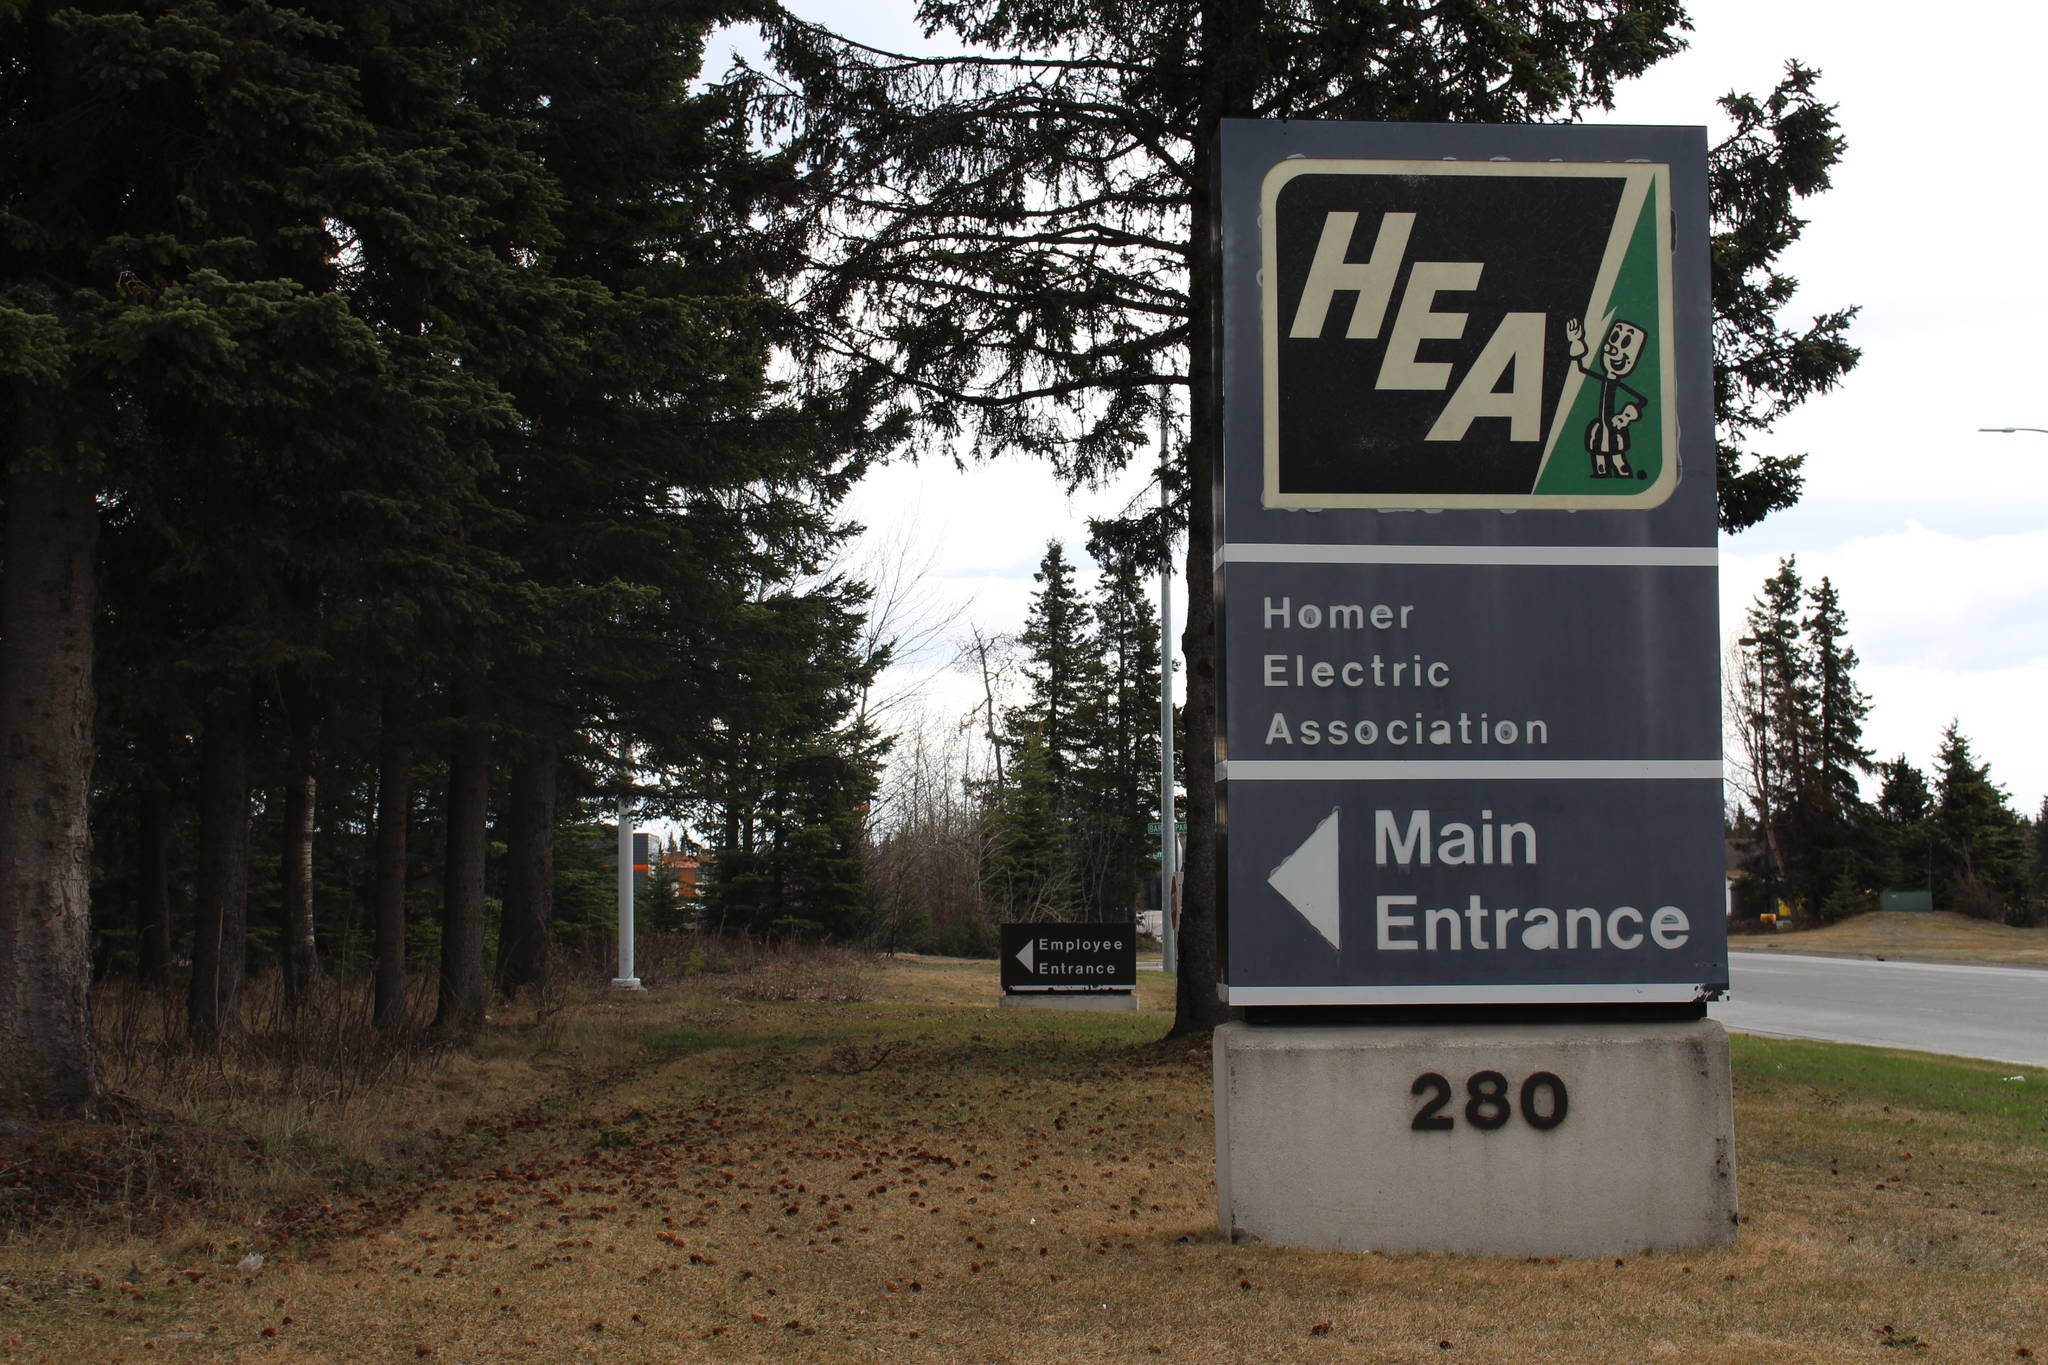 The entrance to the Homer Electric Association office is seen here in Kenai, Alaska, on May 7, 2020. (Photo by Brian Mazurek/Peninsula Clarion)